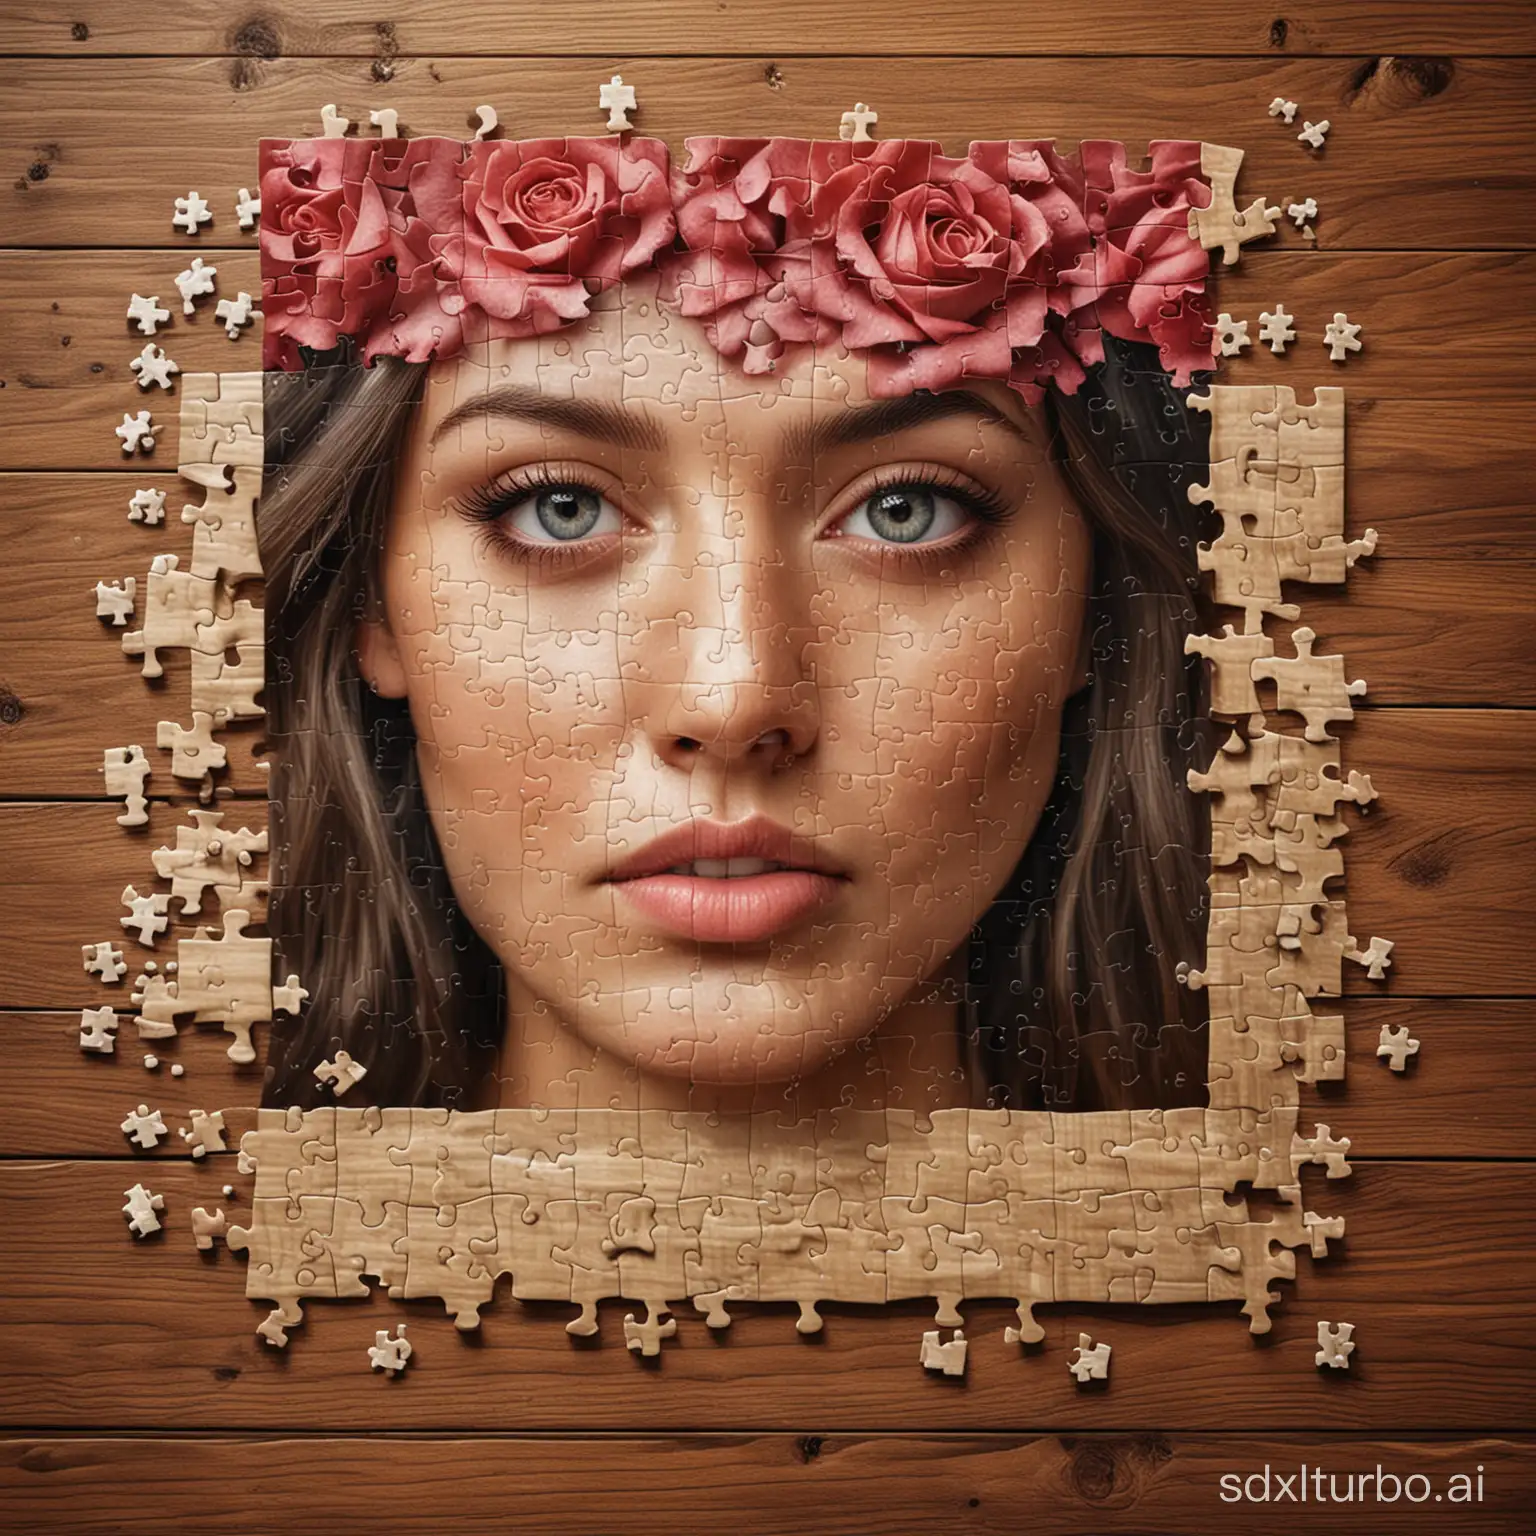 Puzzle with a beautiful woman's face, on a wooden table, photorealistic picture inspired by Michael Komark, hyperrealistic photography], realistic picture of a cute girl, pixels, puzzle studded with rose leaves, amazing art, hyperrealistic, professional photography], puzzle